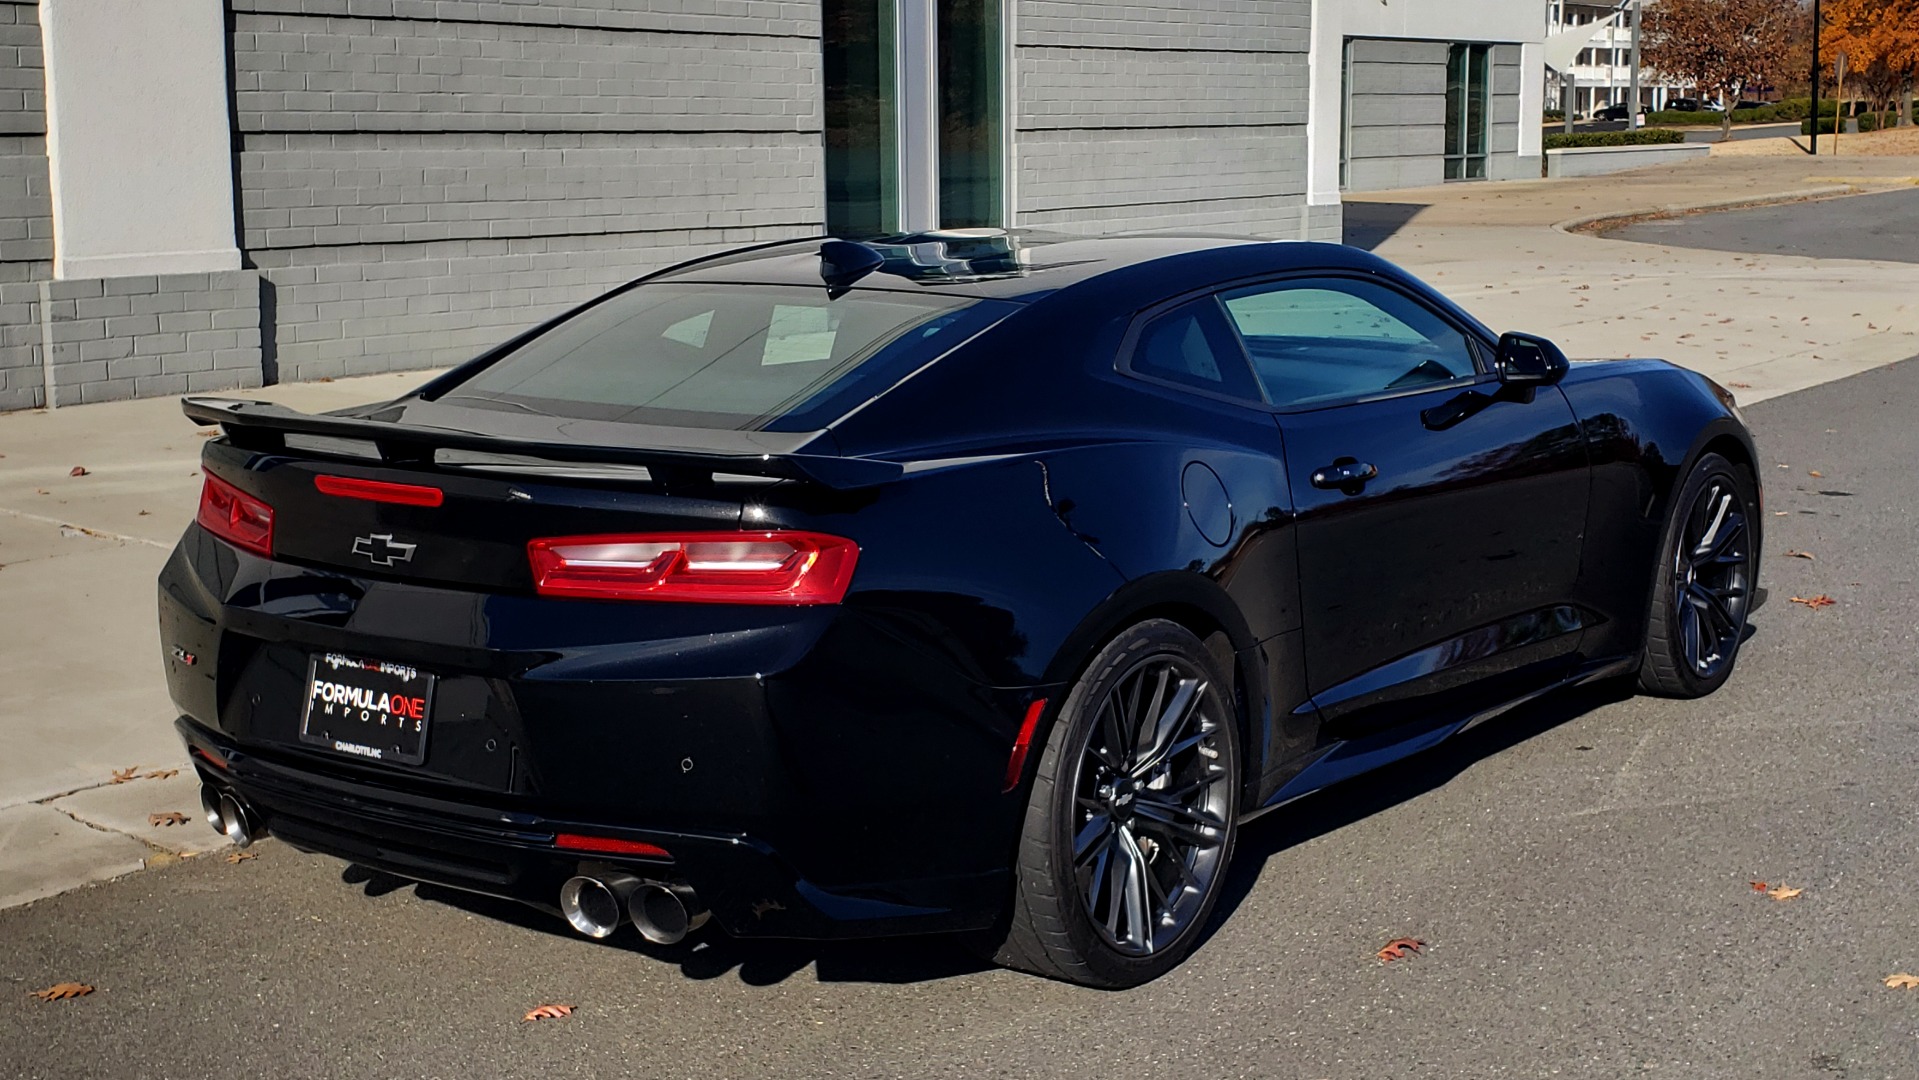 Used 2017 Chevrolet CAMARO ZL1 COUPE / 6.2L SC LT4 V8 (650HP) / 6-SPD MAN / NAV / BOSE / REARVIEW for sale $58,995 at Formula Imports in Charlotte NC 28227 10